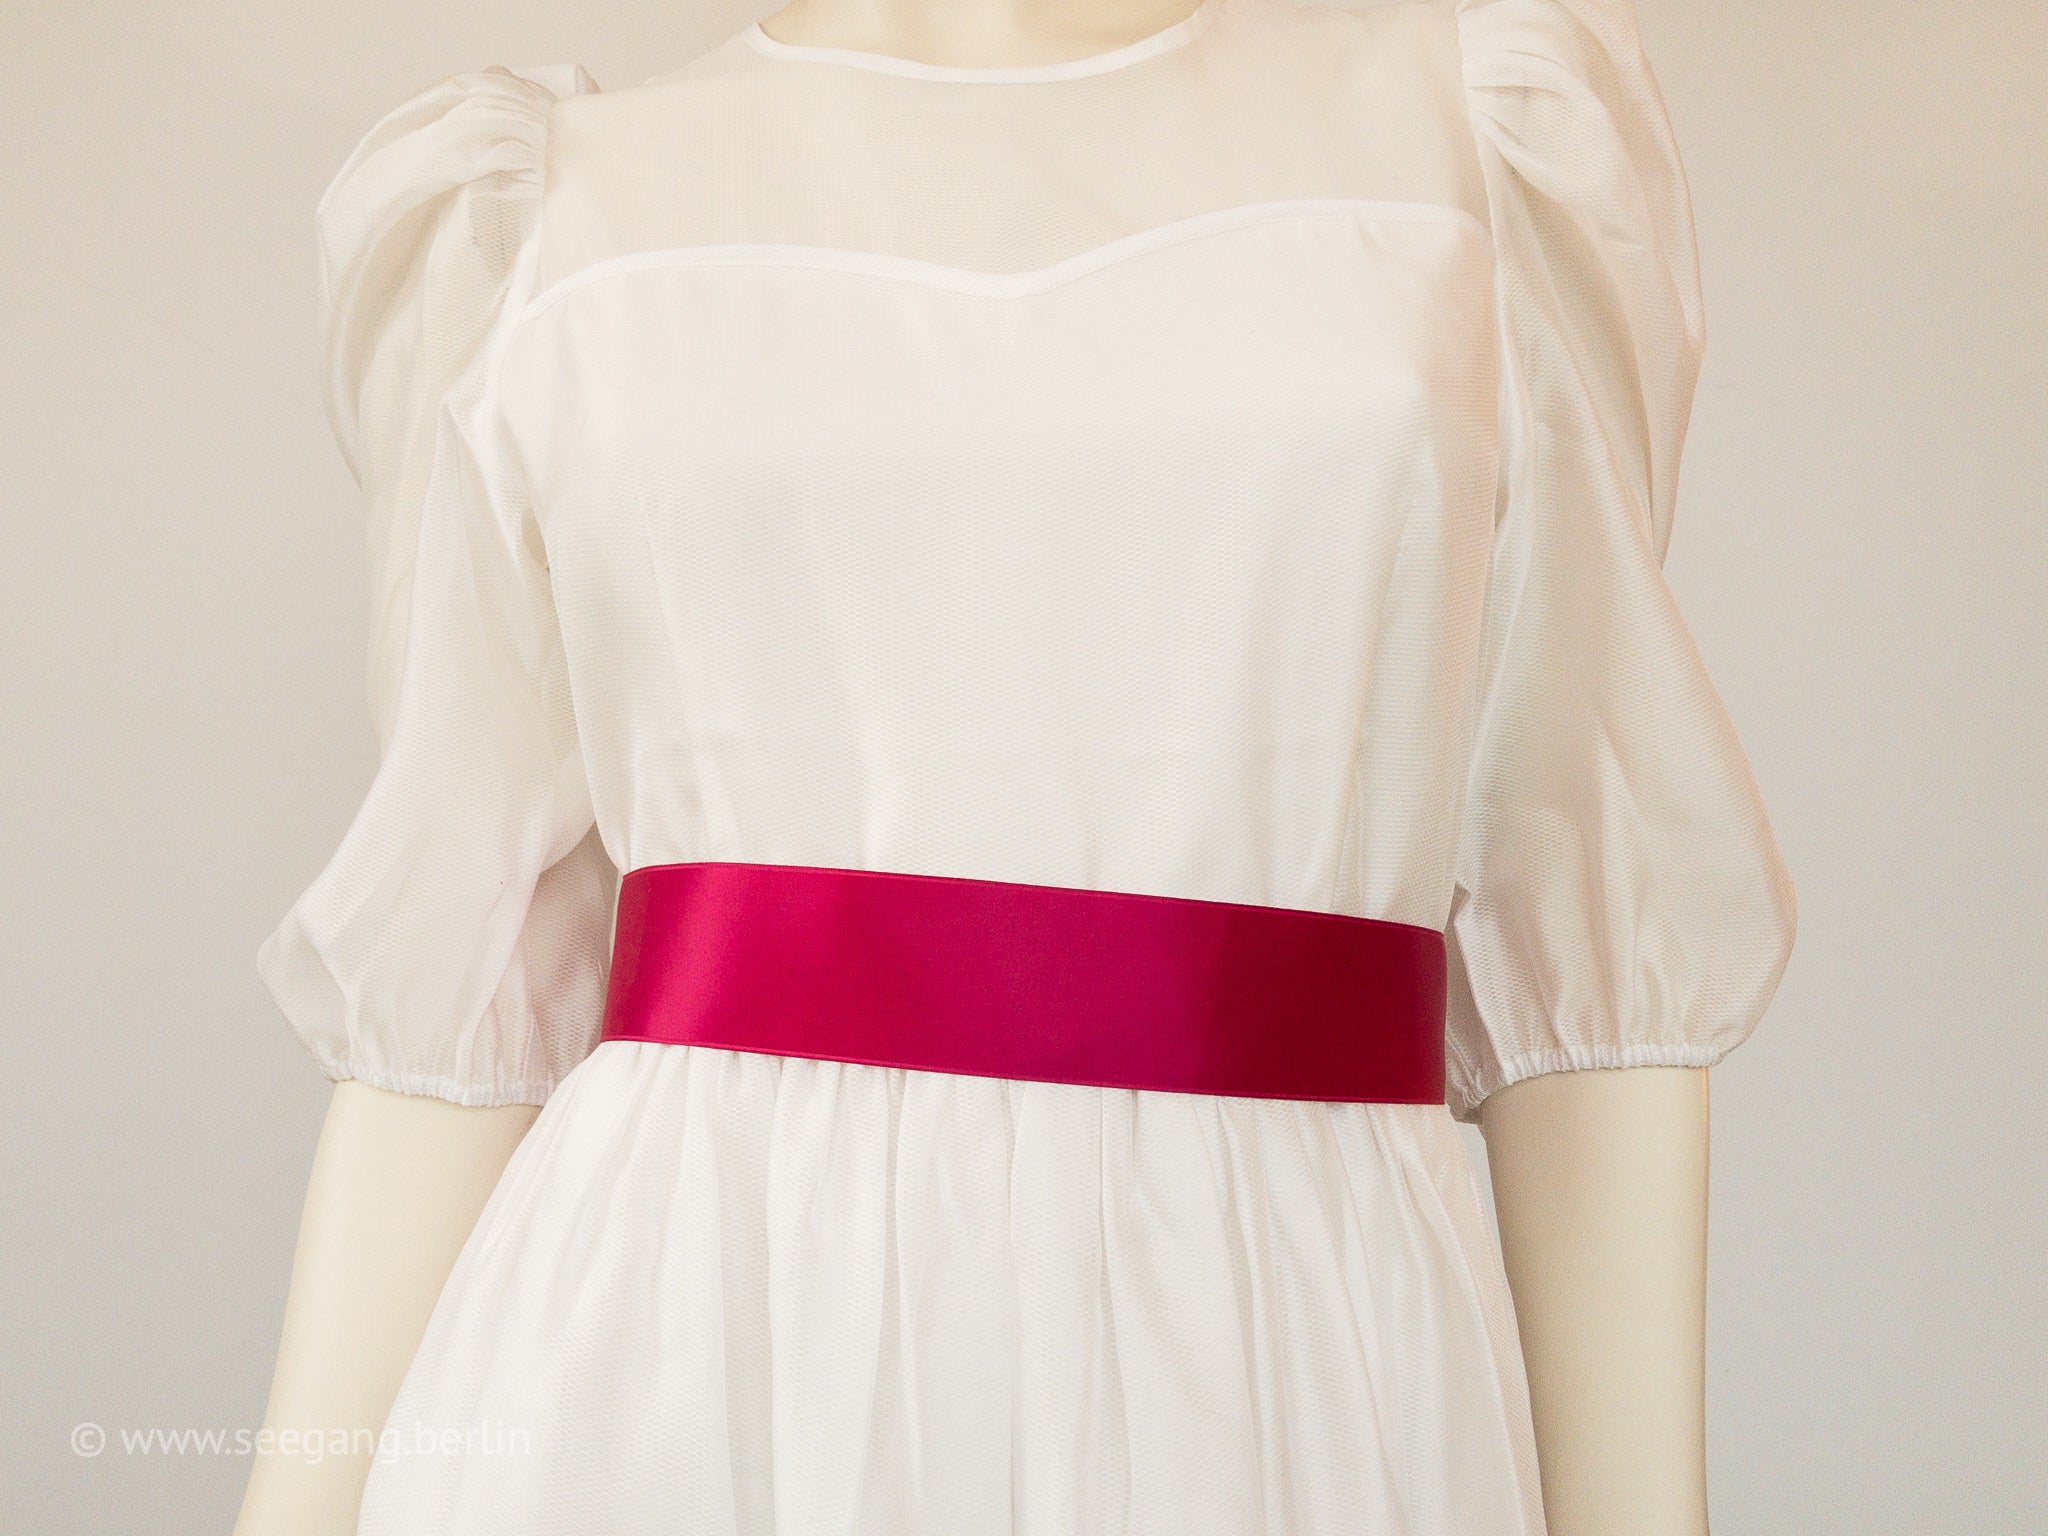 BRIDAL BELT IN MANY SHADES OF PINK - SWISS QUALITY!